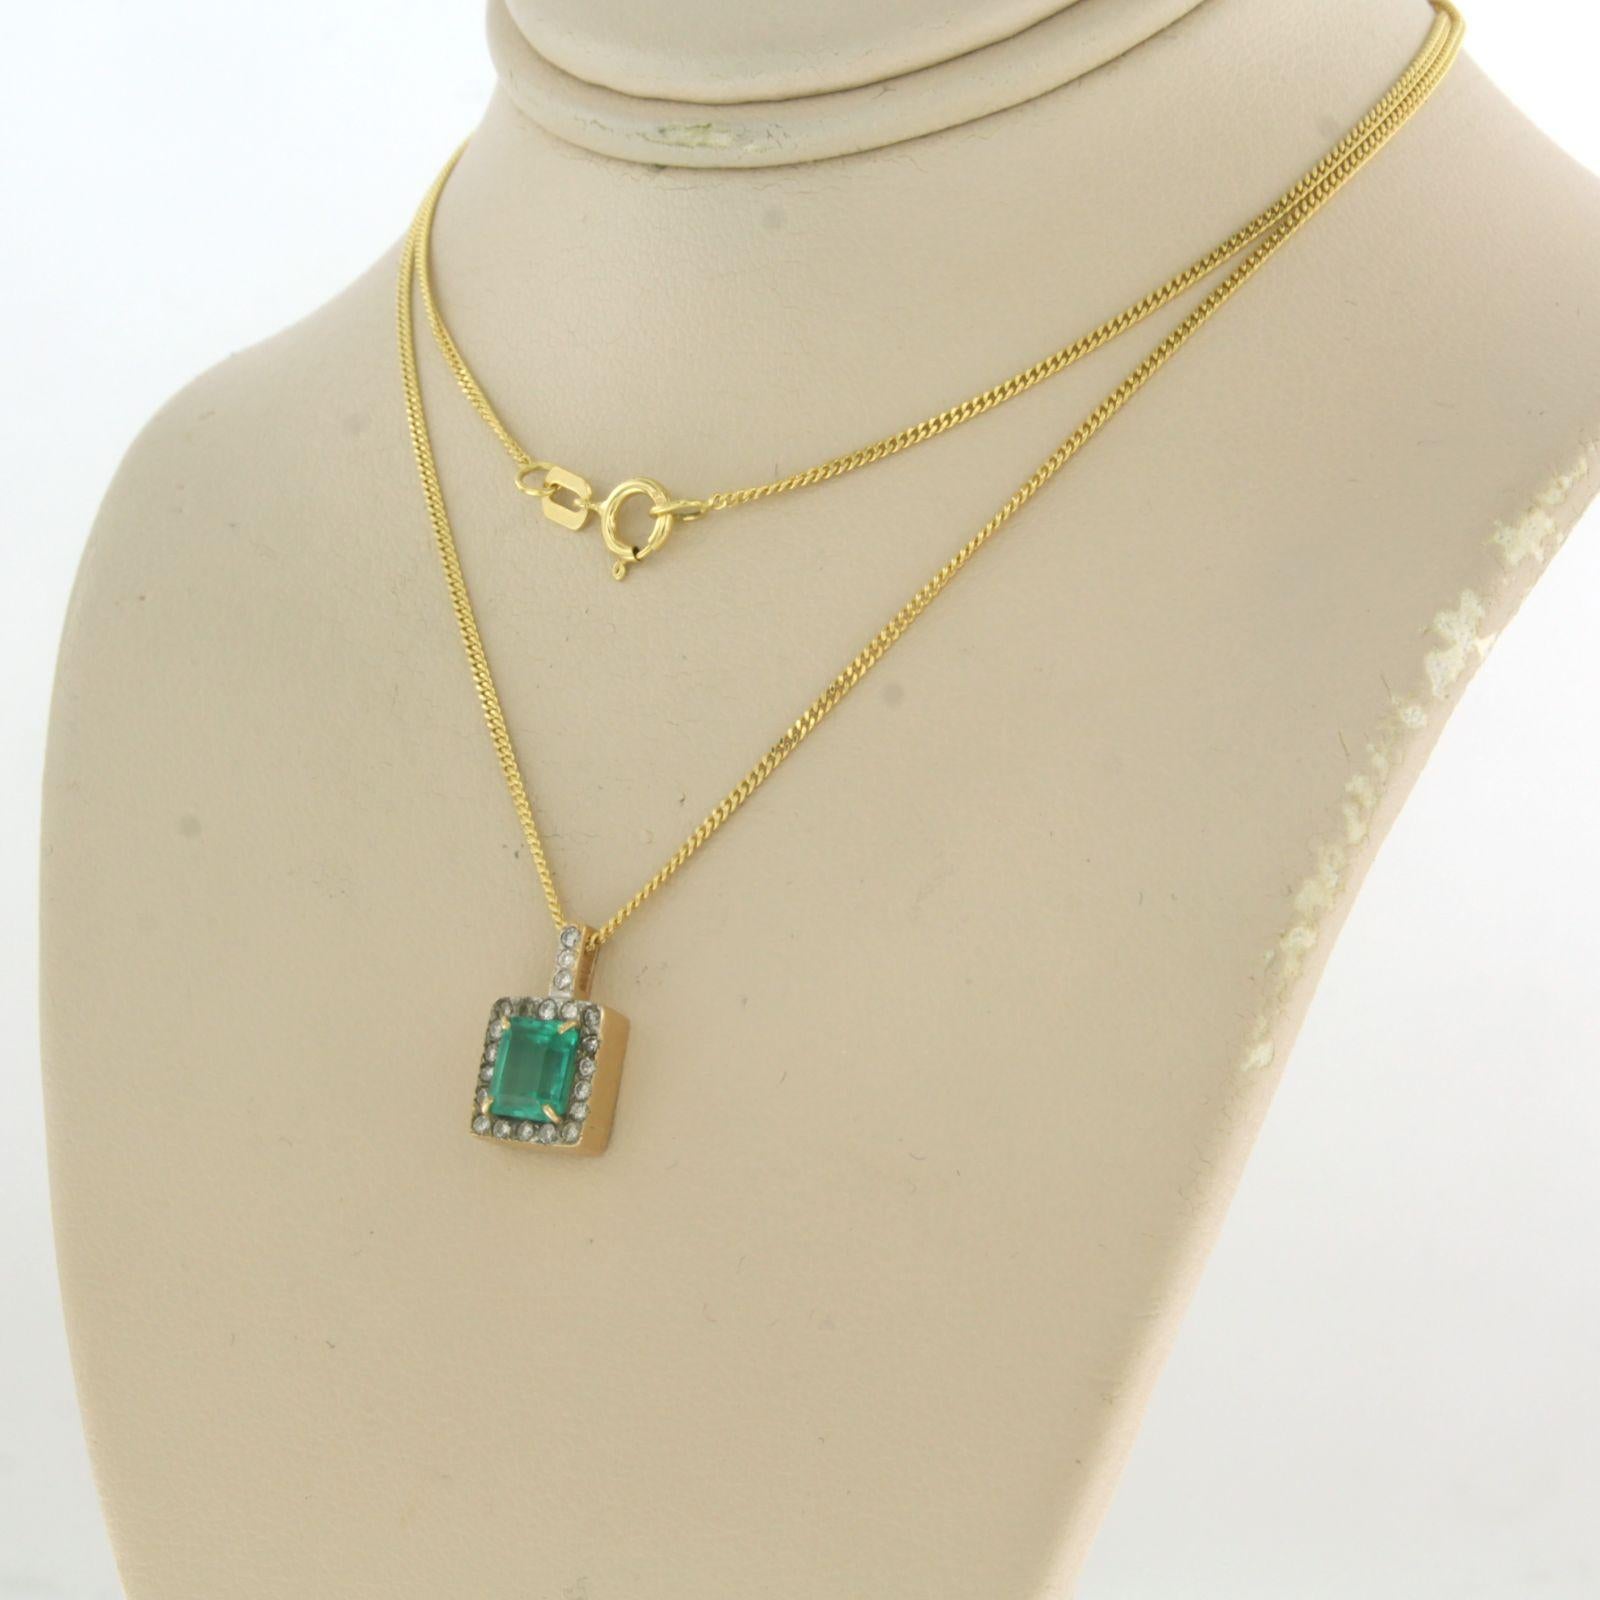 14k yellow gold necklace with pendant set with emerald and brilliant cut diamonds total approx. 0.25 ct - F/G - VS/SI - 45 cm long

detailed description

the necklace is 45 cm long and 1.0 mm wide

the pendant is 1.3 cm high and 0.8 cm wide

total